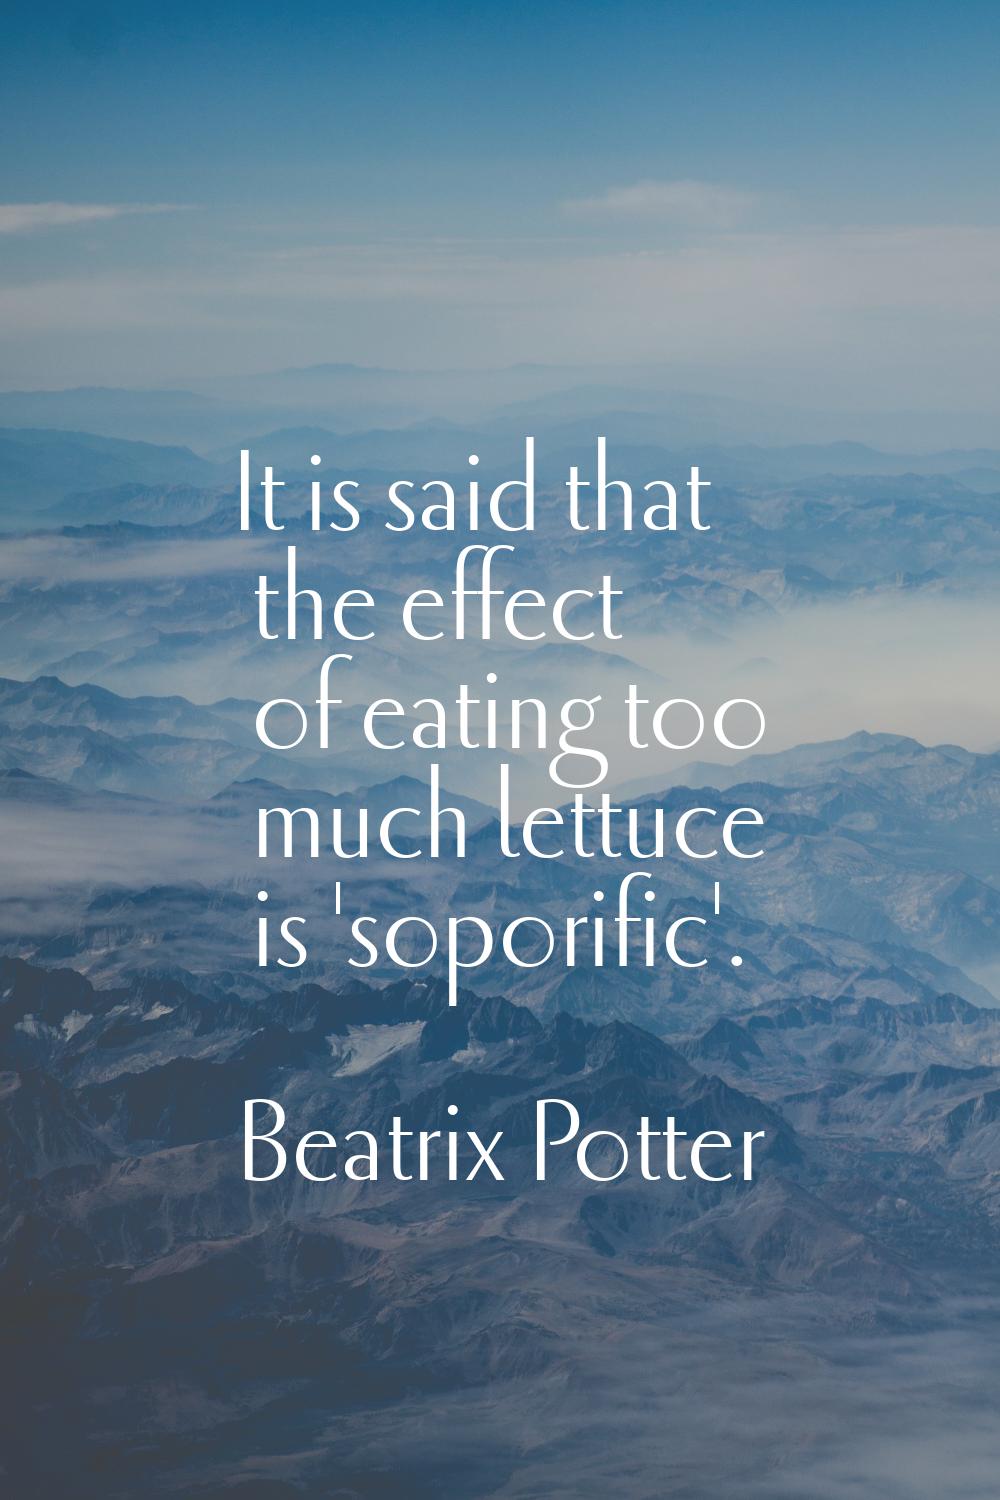 It is said that the effect of eating too much lettuce is 'soporific'.